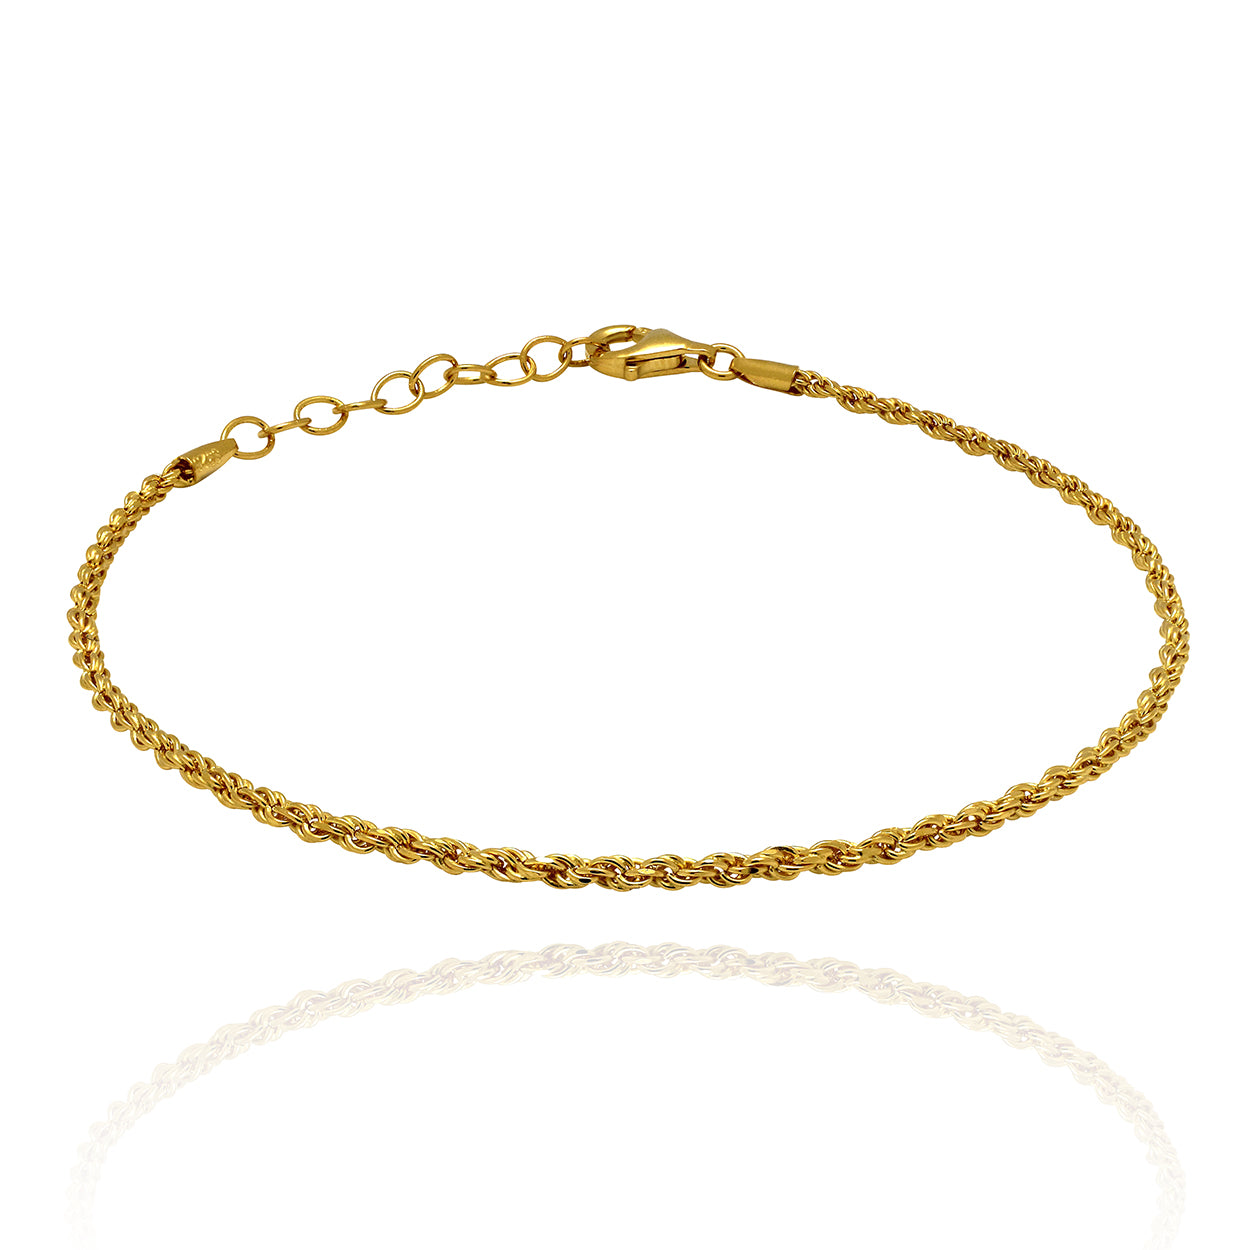 Sterling Silver Rope Style Bracelet Plated in 18KT Yellow Gold 2